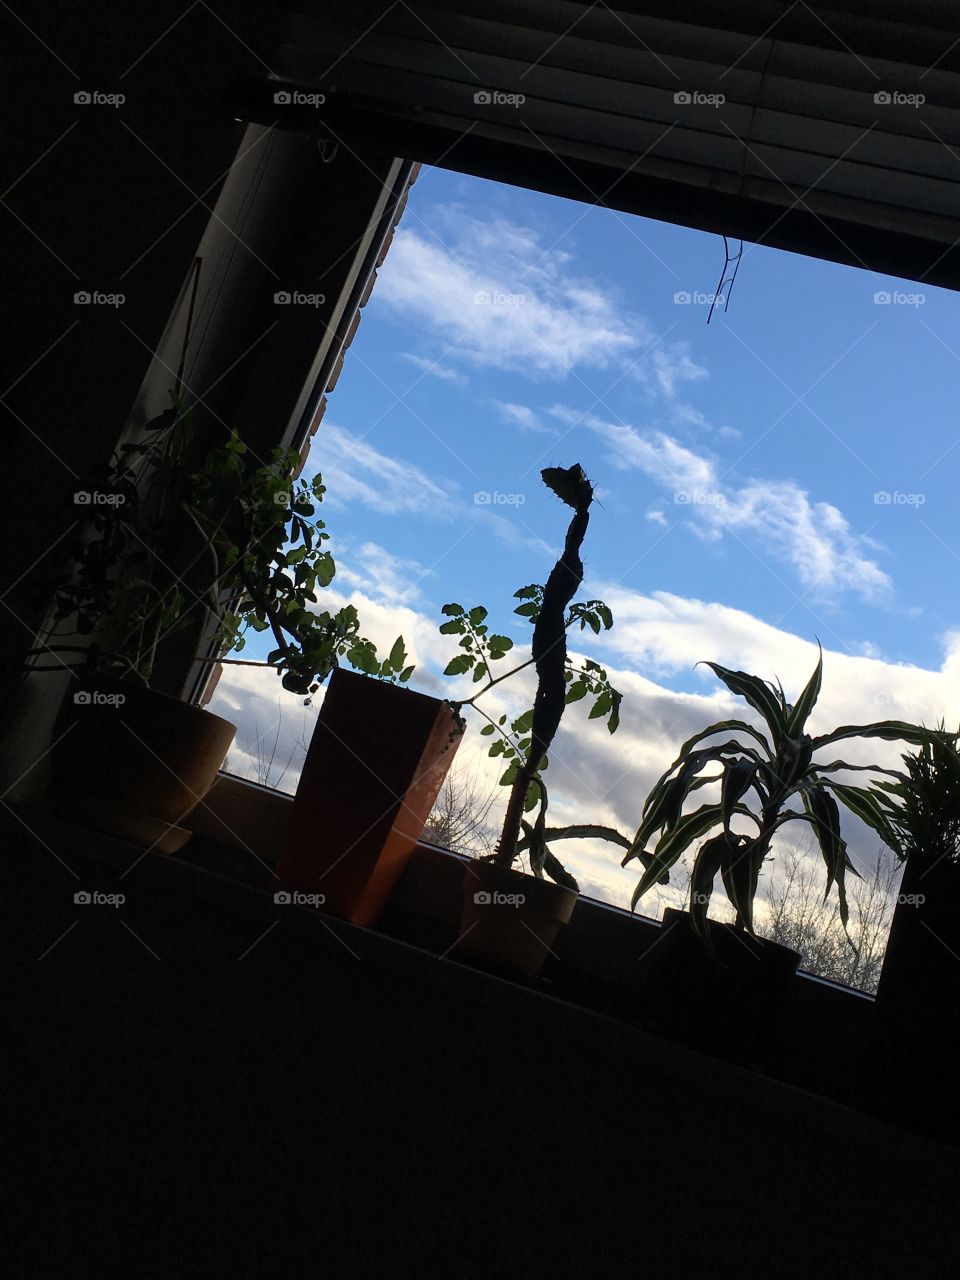 Plants by the window 